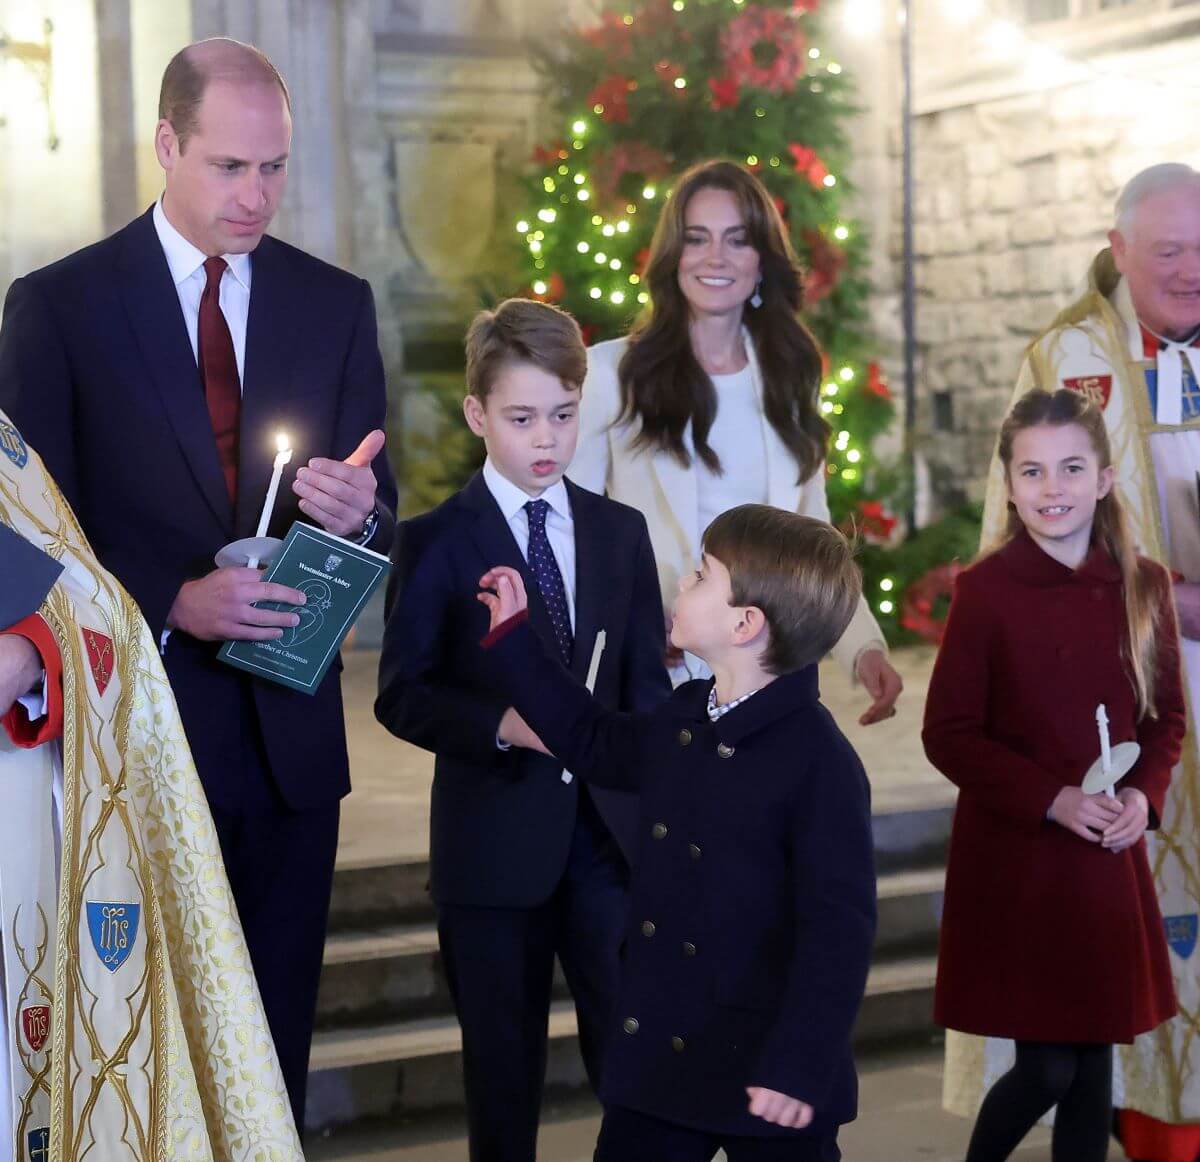 Prince William, Kate Middleton, Prince Louis, Prince George, and Princess Charlotte leave the 'Together At Christmas' Carol Service at Westminster Abbey